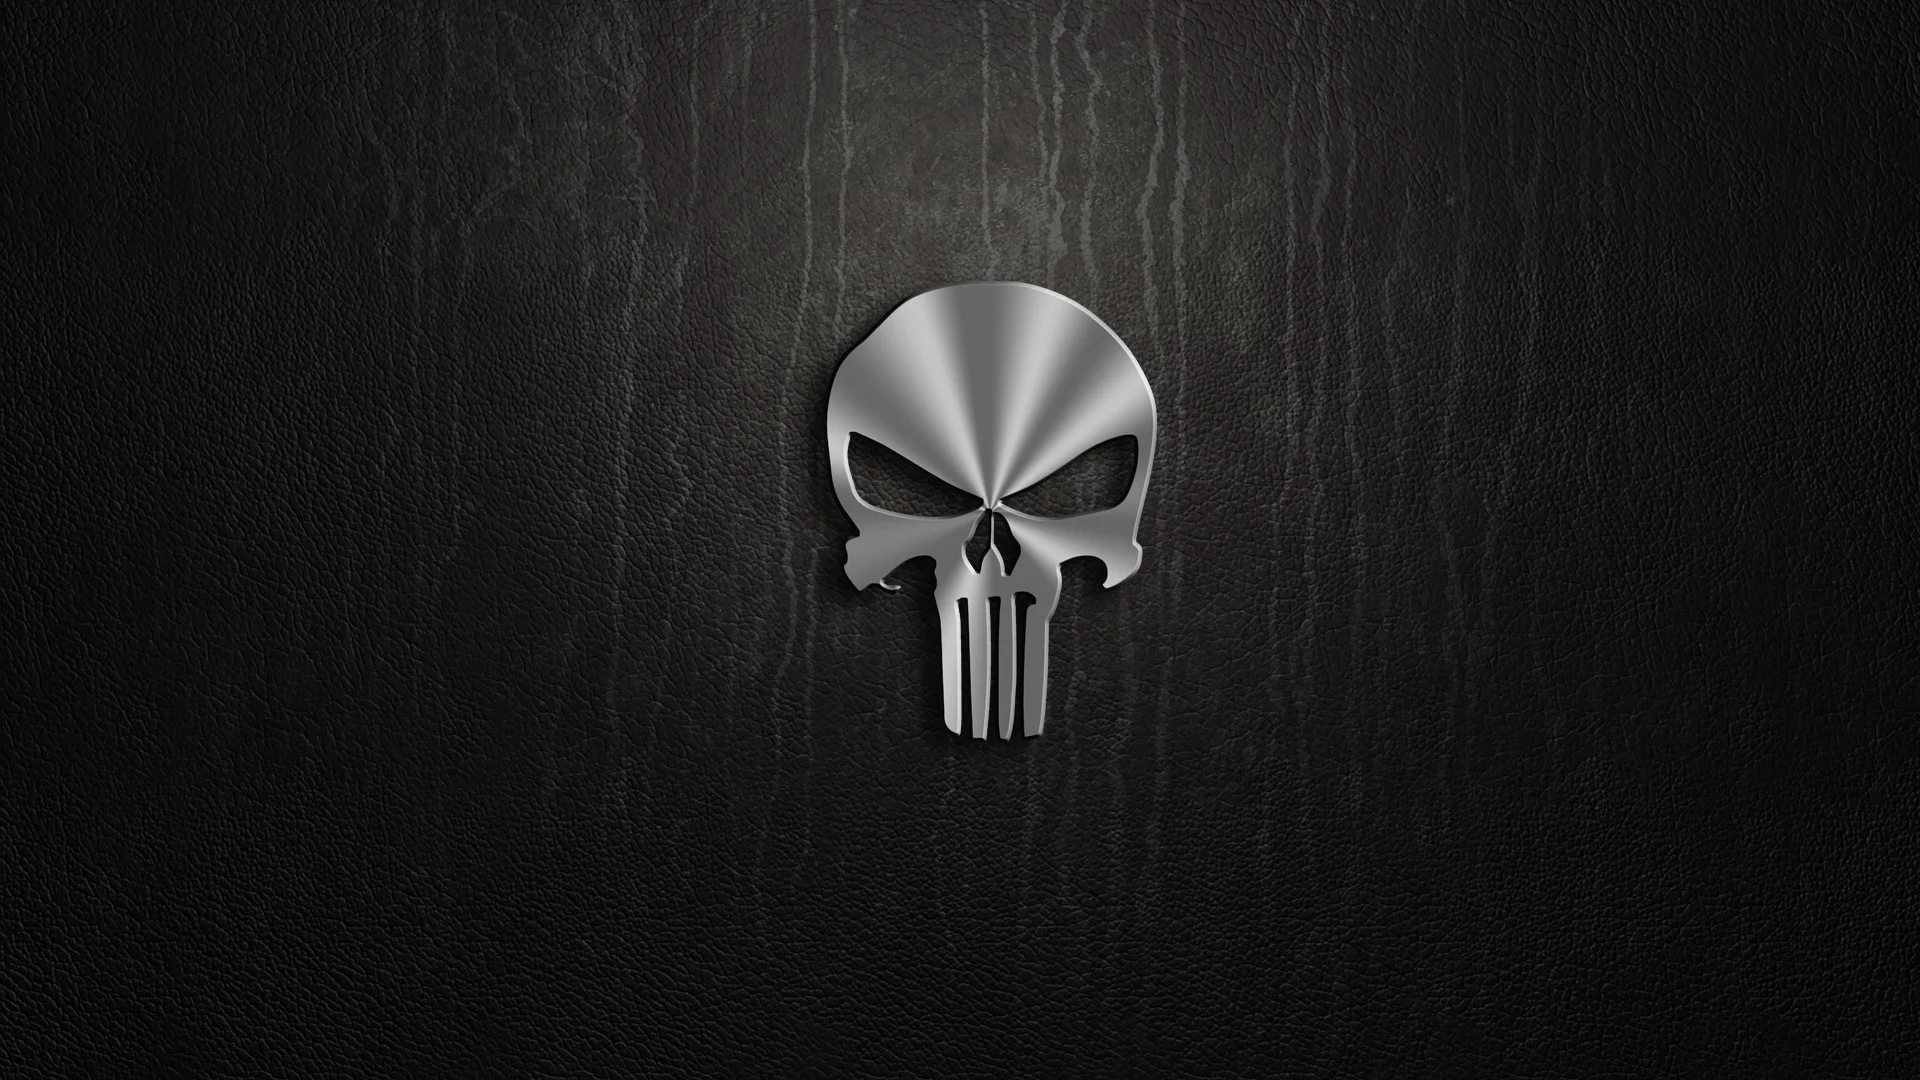 Punisher Wallpaper Pack Android Apps on Google Play HD Wallpapers Pinterest Punisher and Full hd pictures